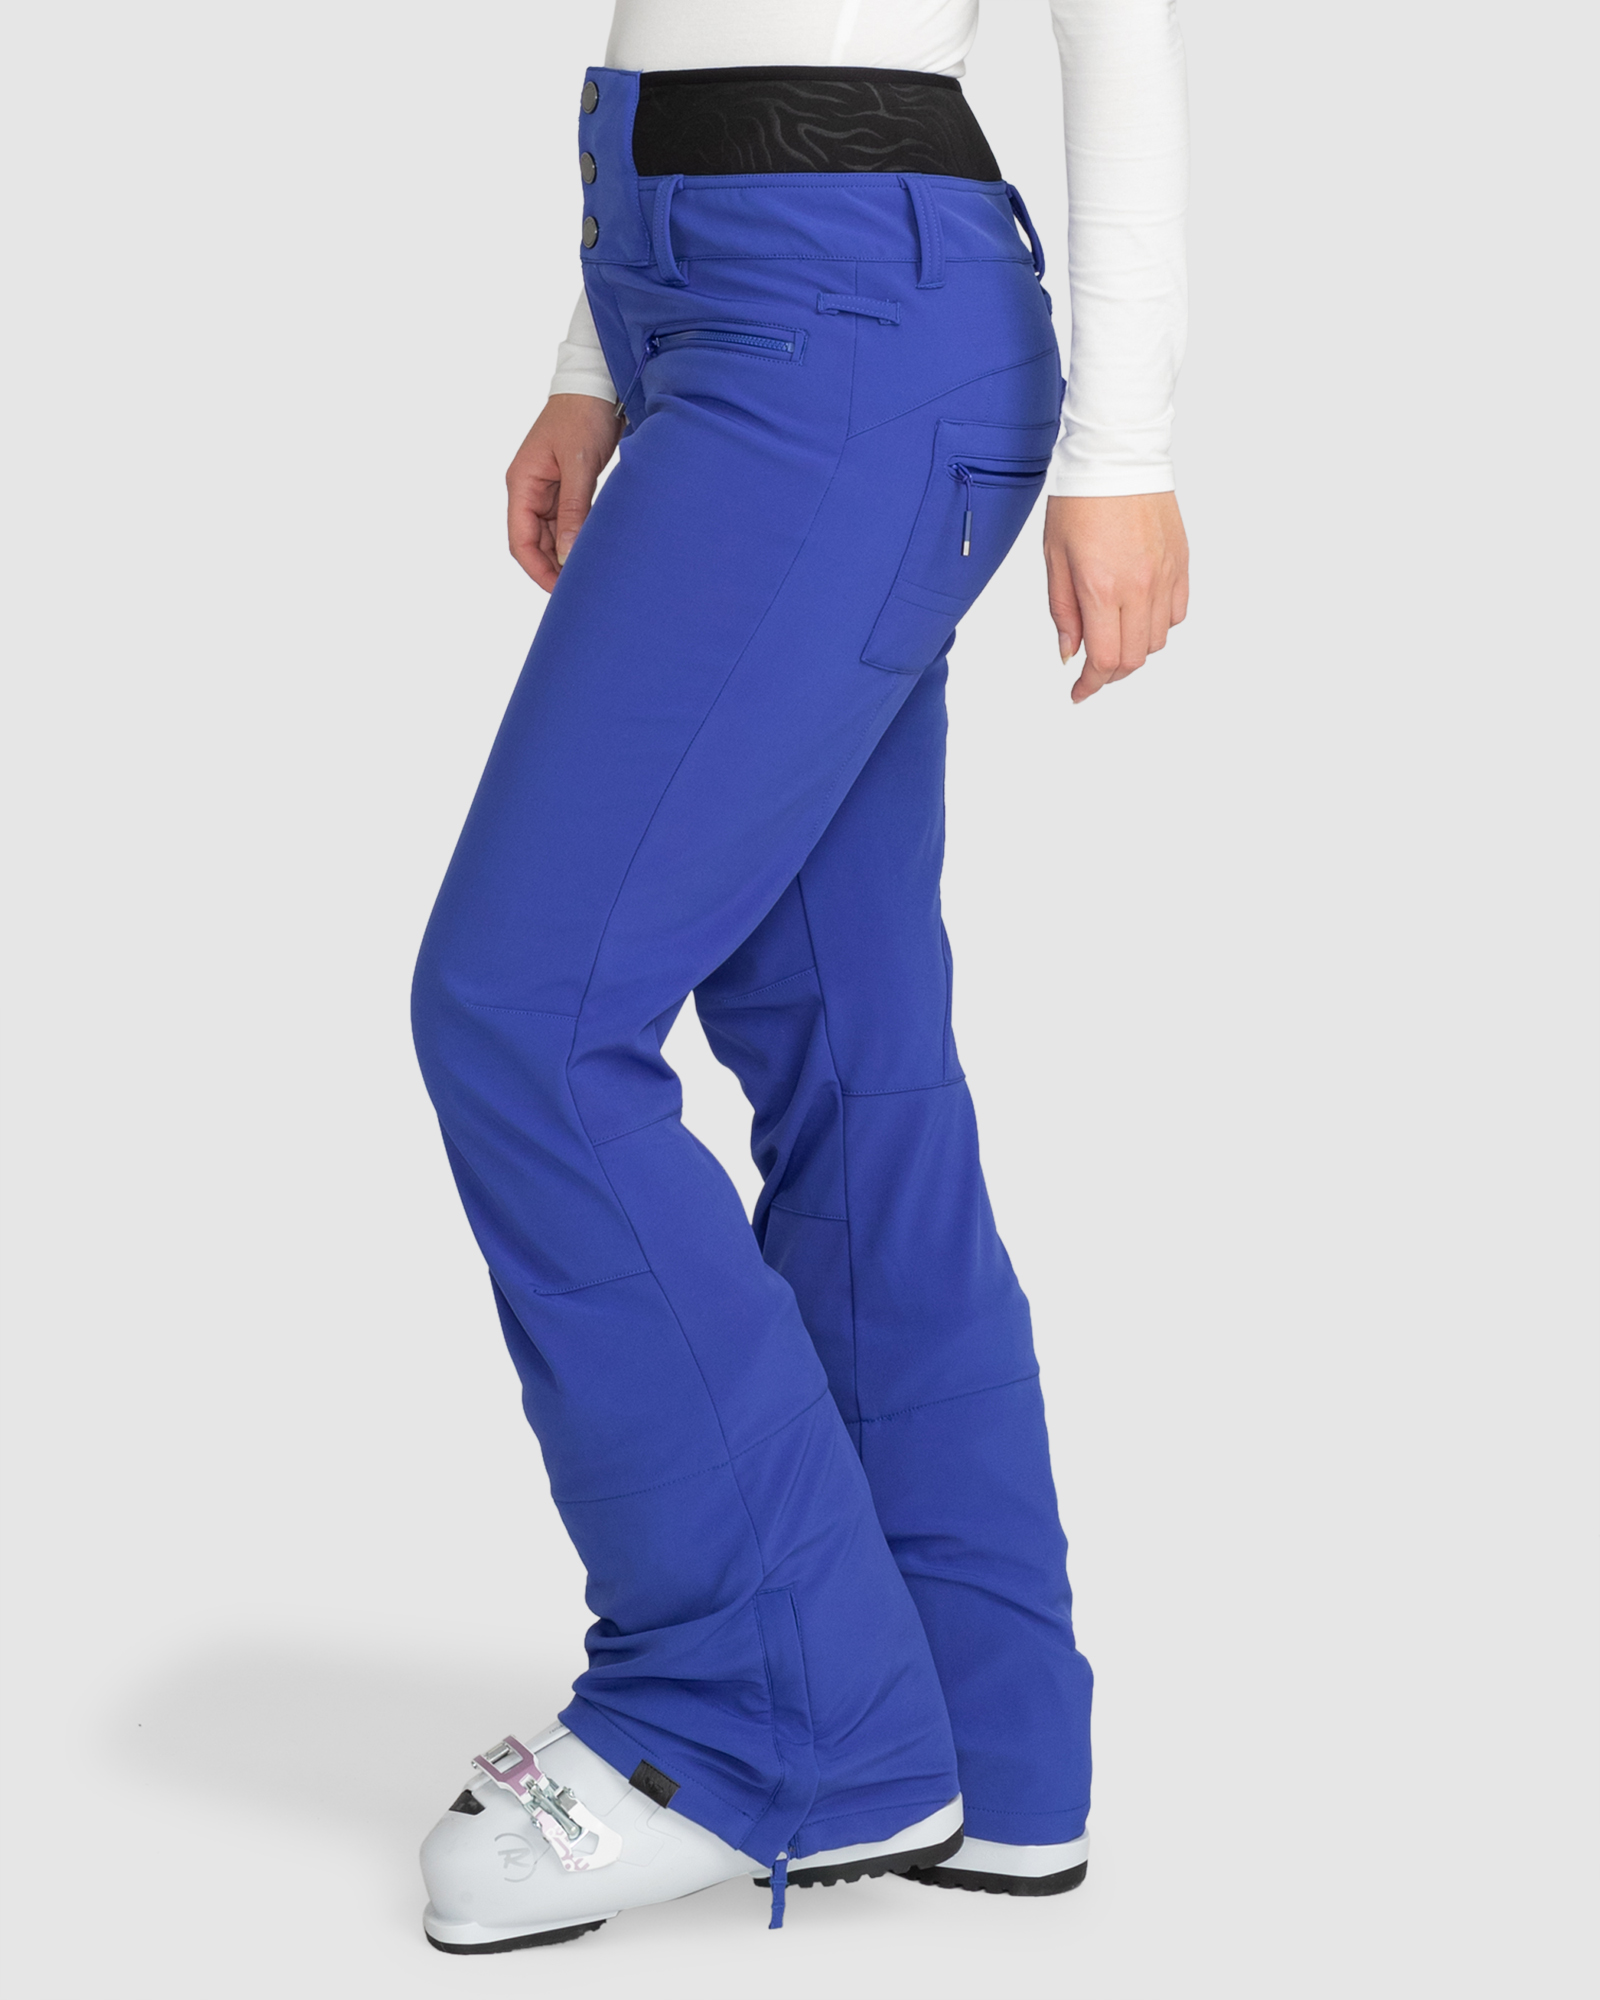 All in Motion Women's Snow Pants (Indigo Blue, X-Small)